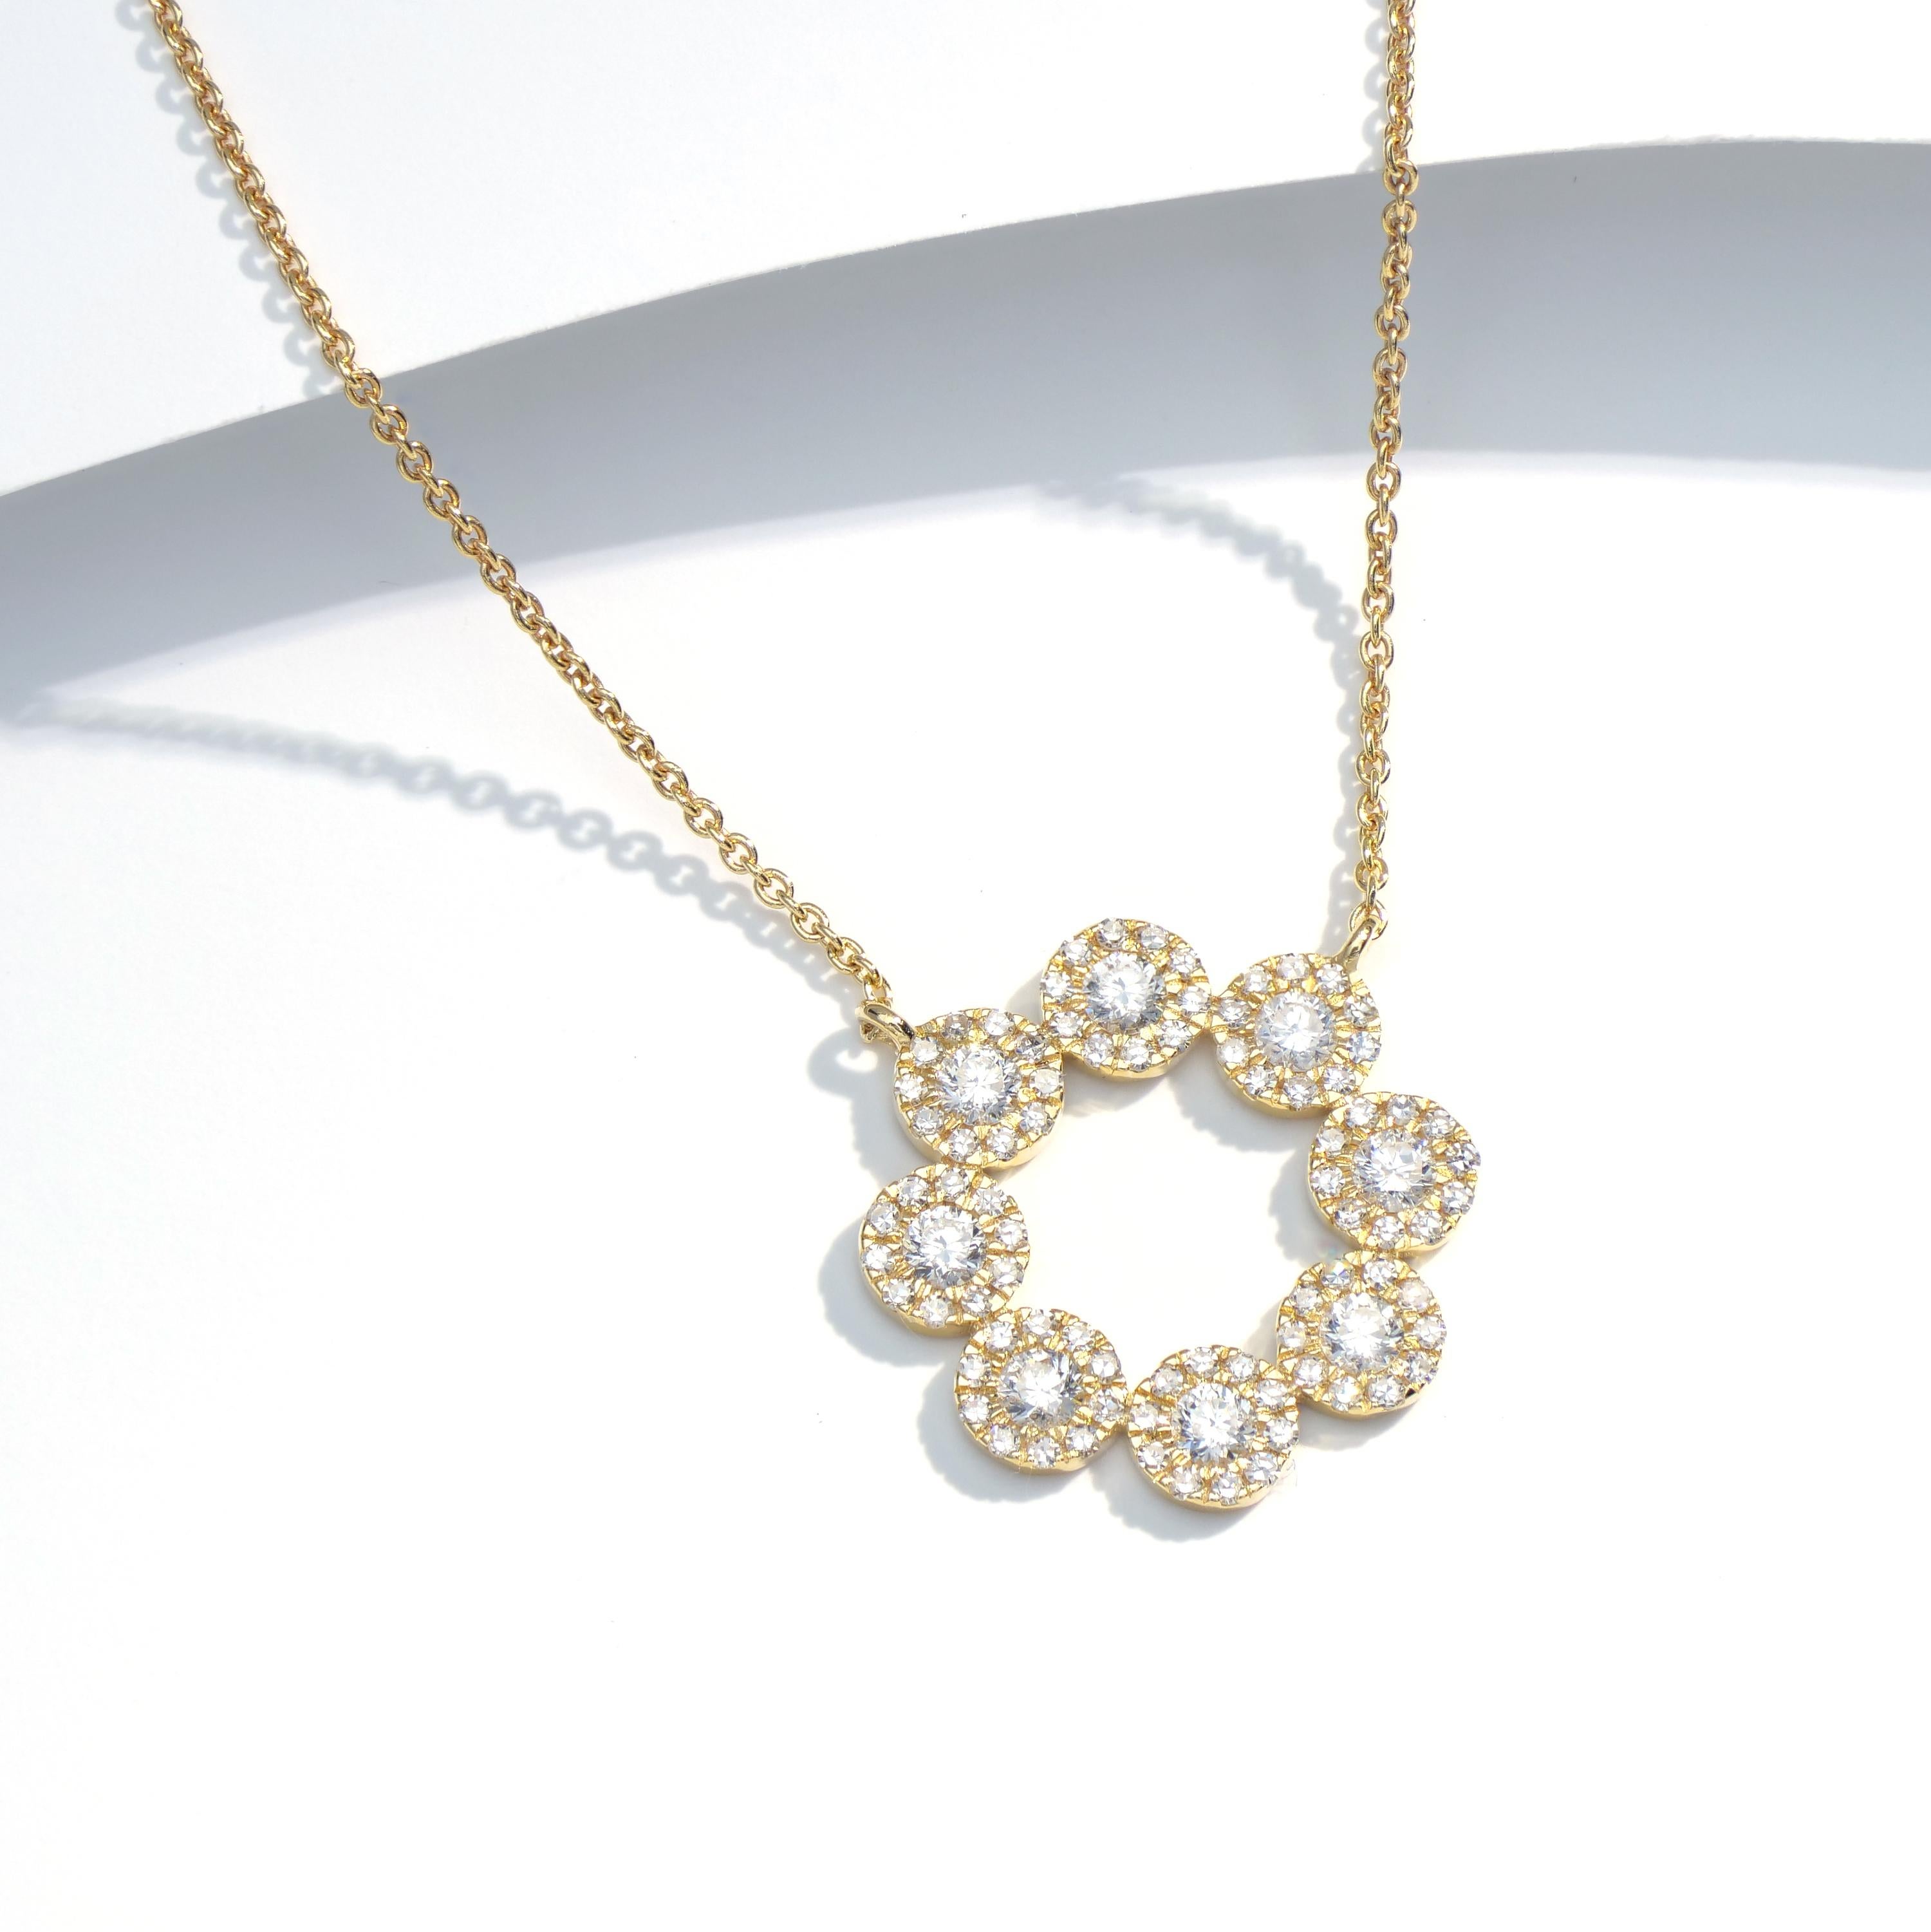 Admiring the simple brilliance of a 14K Yellow Gold Luxle diamond pendant necklace. This necklace features many circle designs that gracefully combine to frame this lovely piece. This pendant hangs from a gold chain and is set with 0.52 carats of